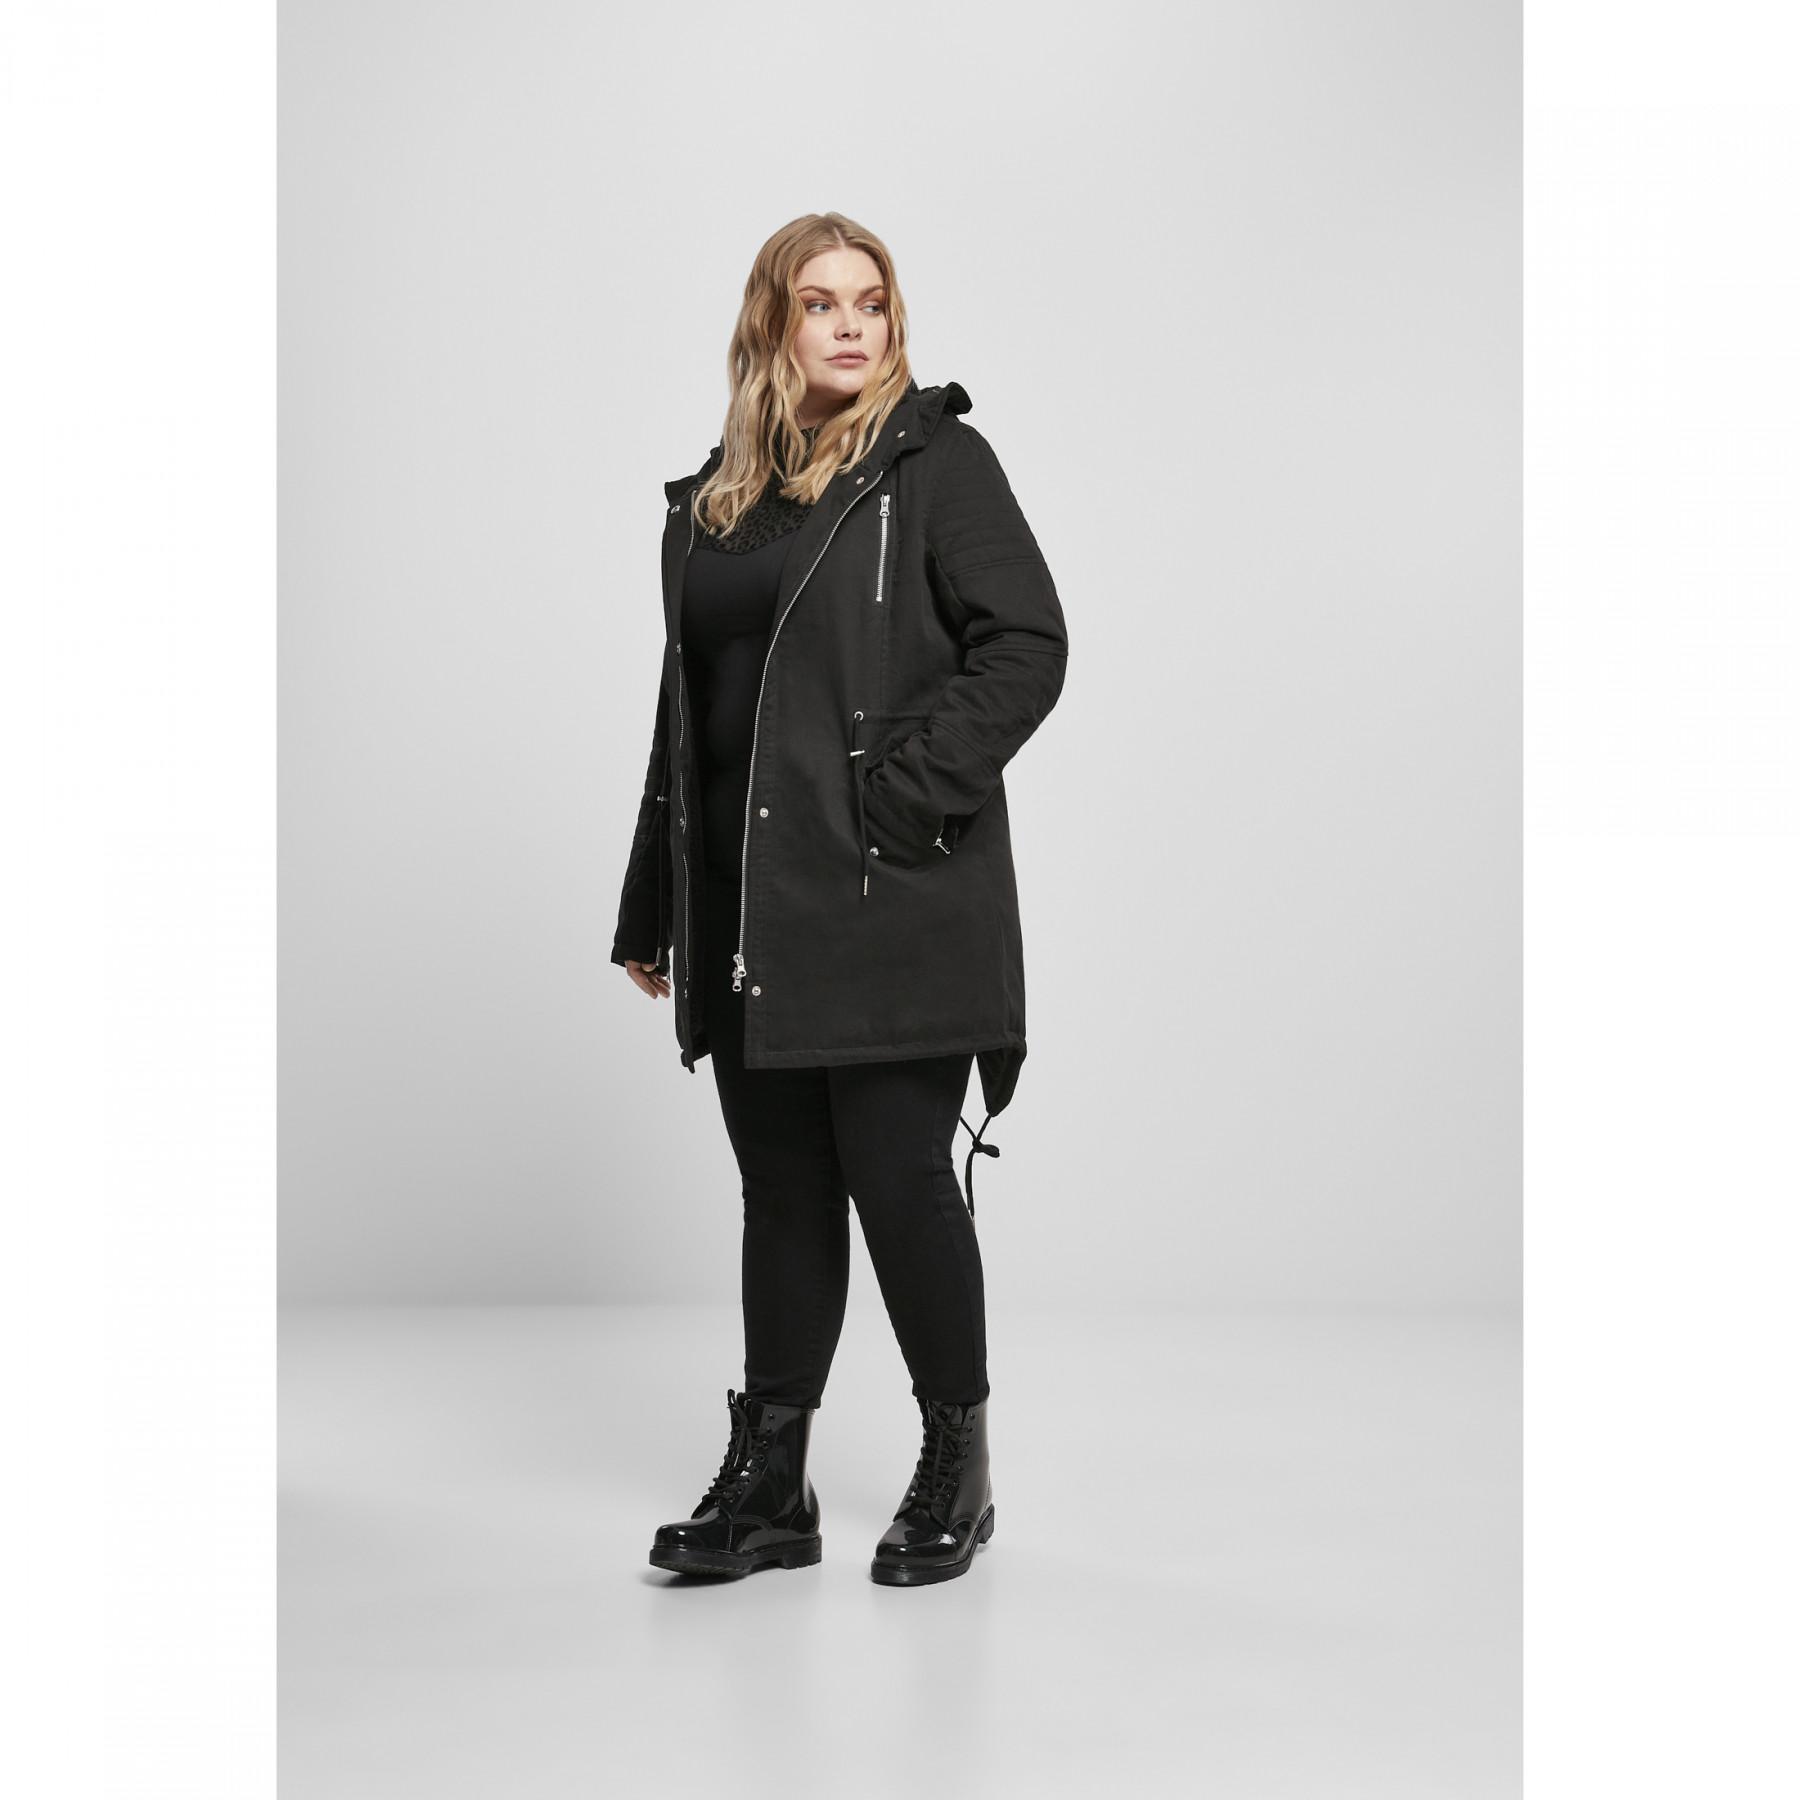 Women's Urban Classic herpa lined cotton GT parka